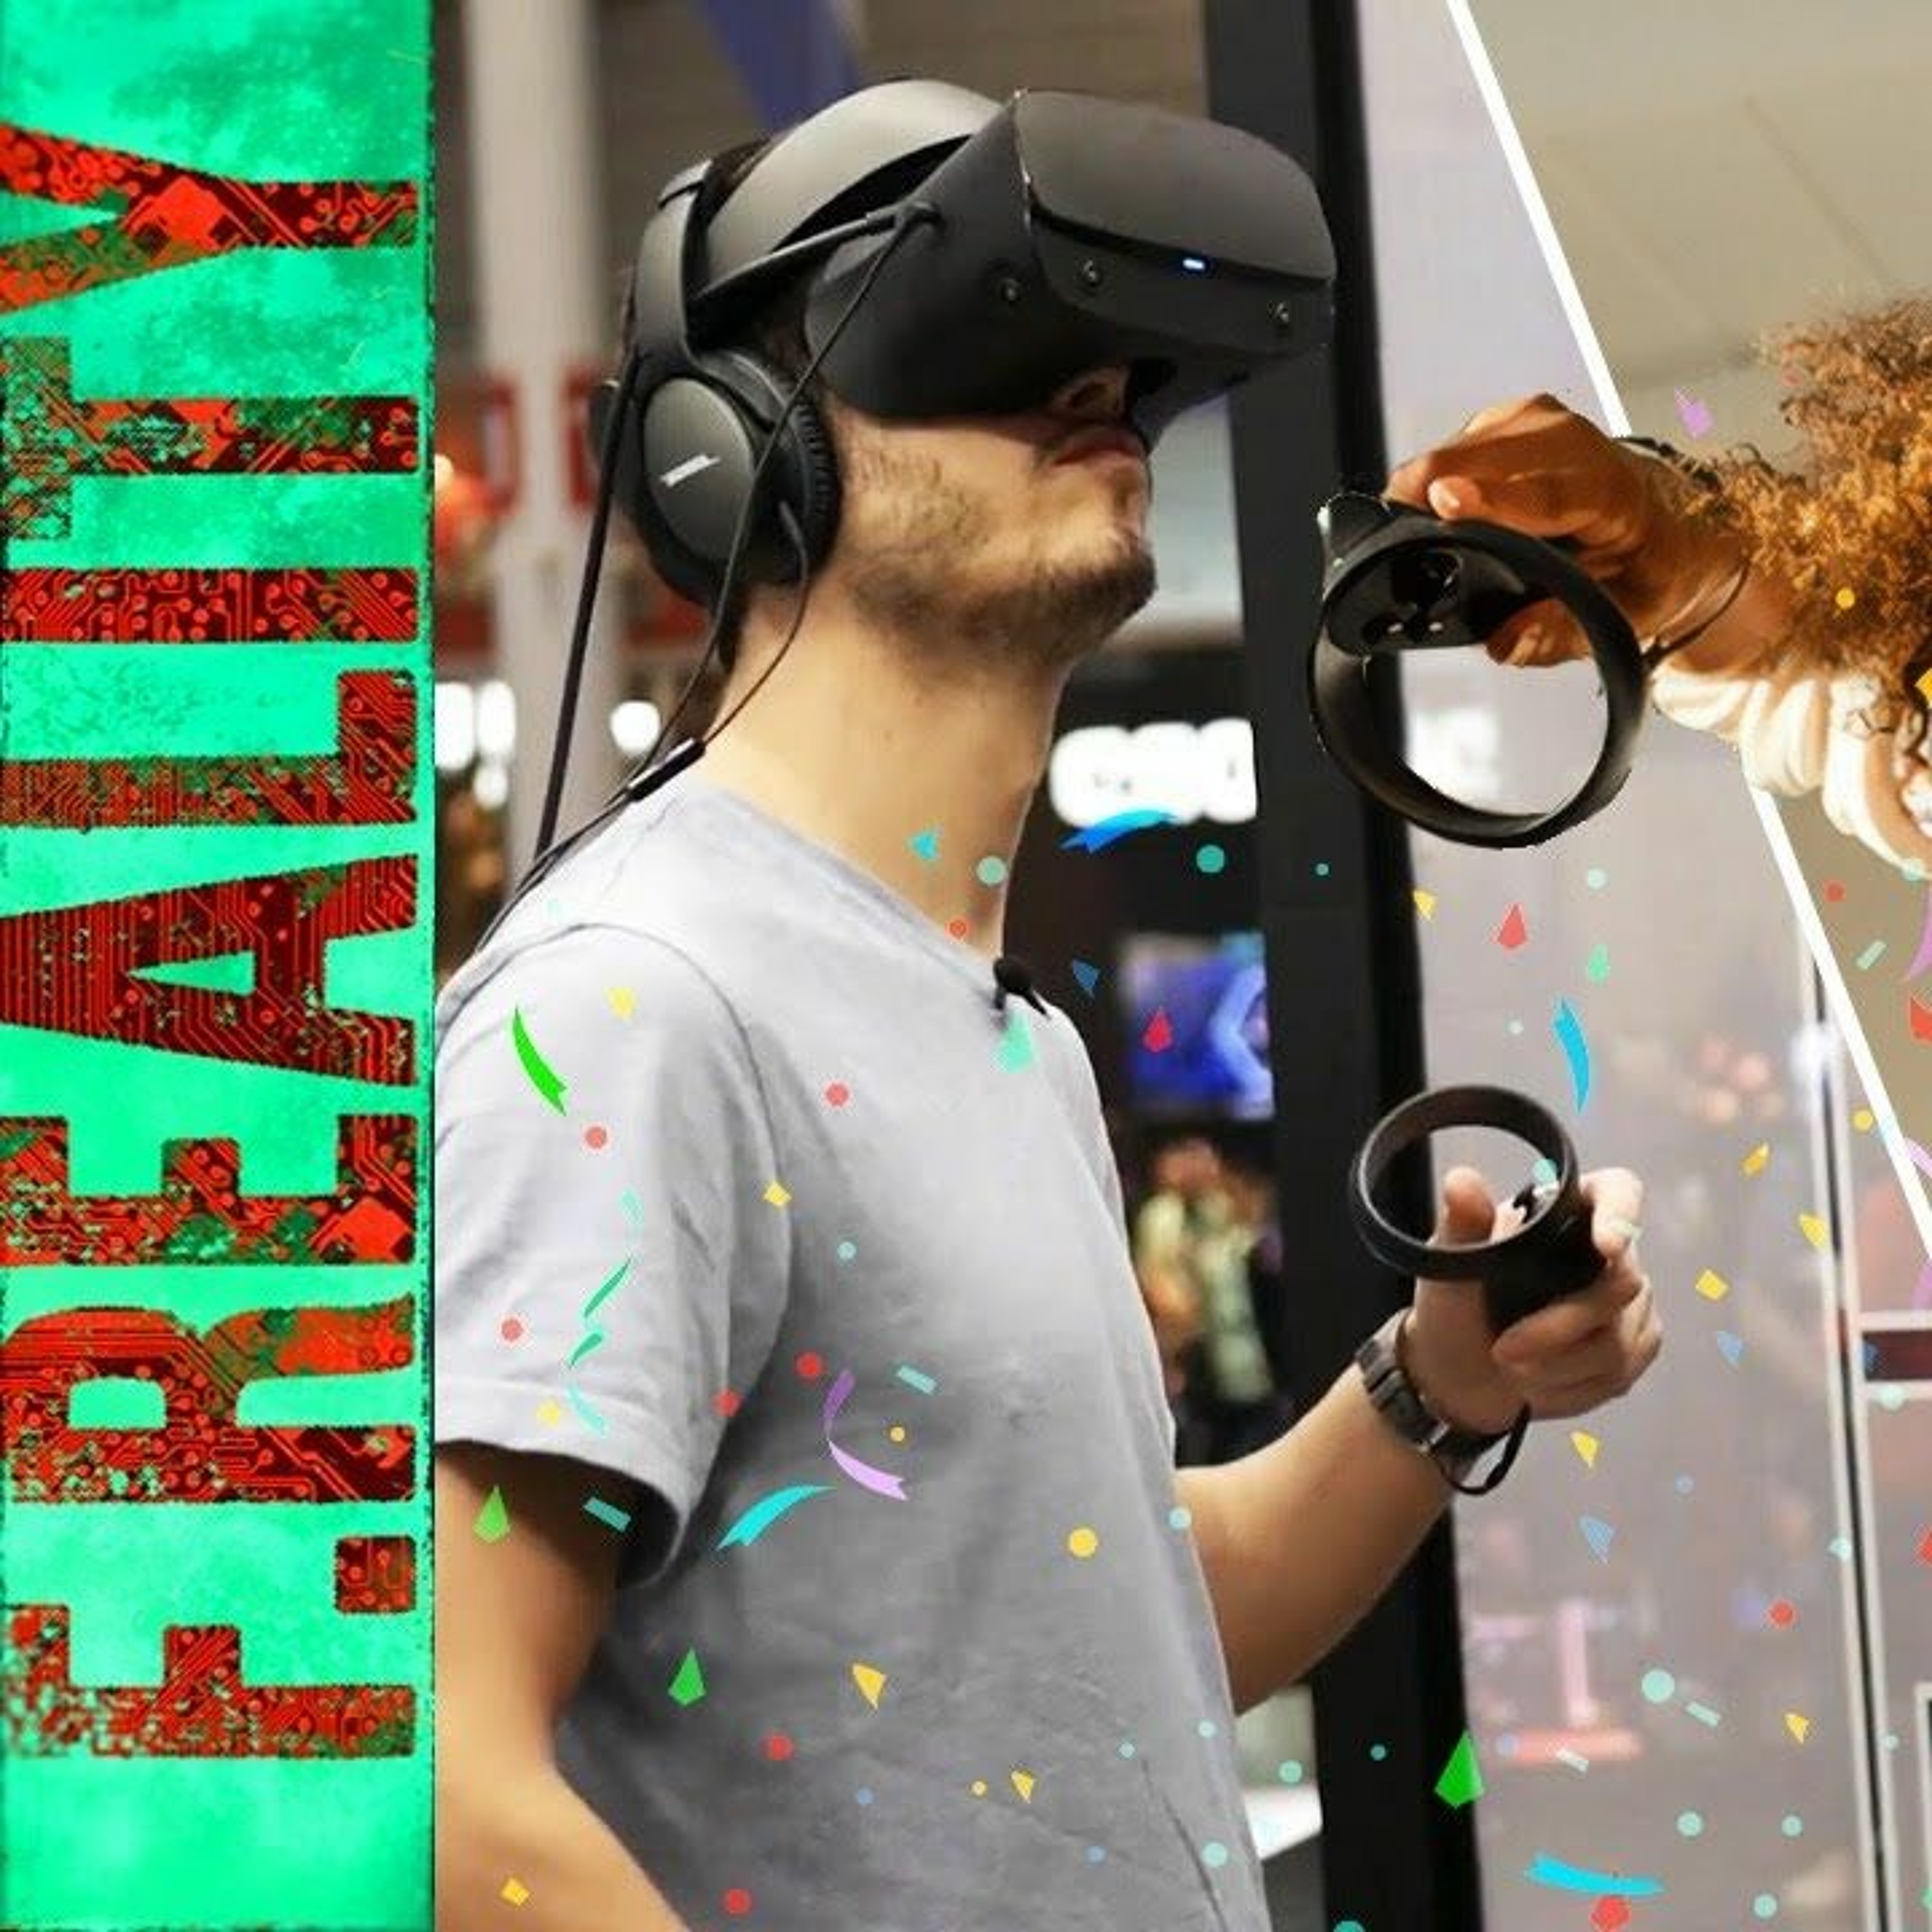 Ep.140 - A Year Later Oculus Quest & Rift S, Iron Man VR & Passthrough Workspace